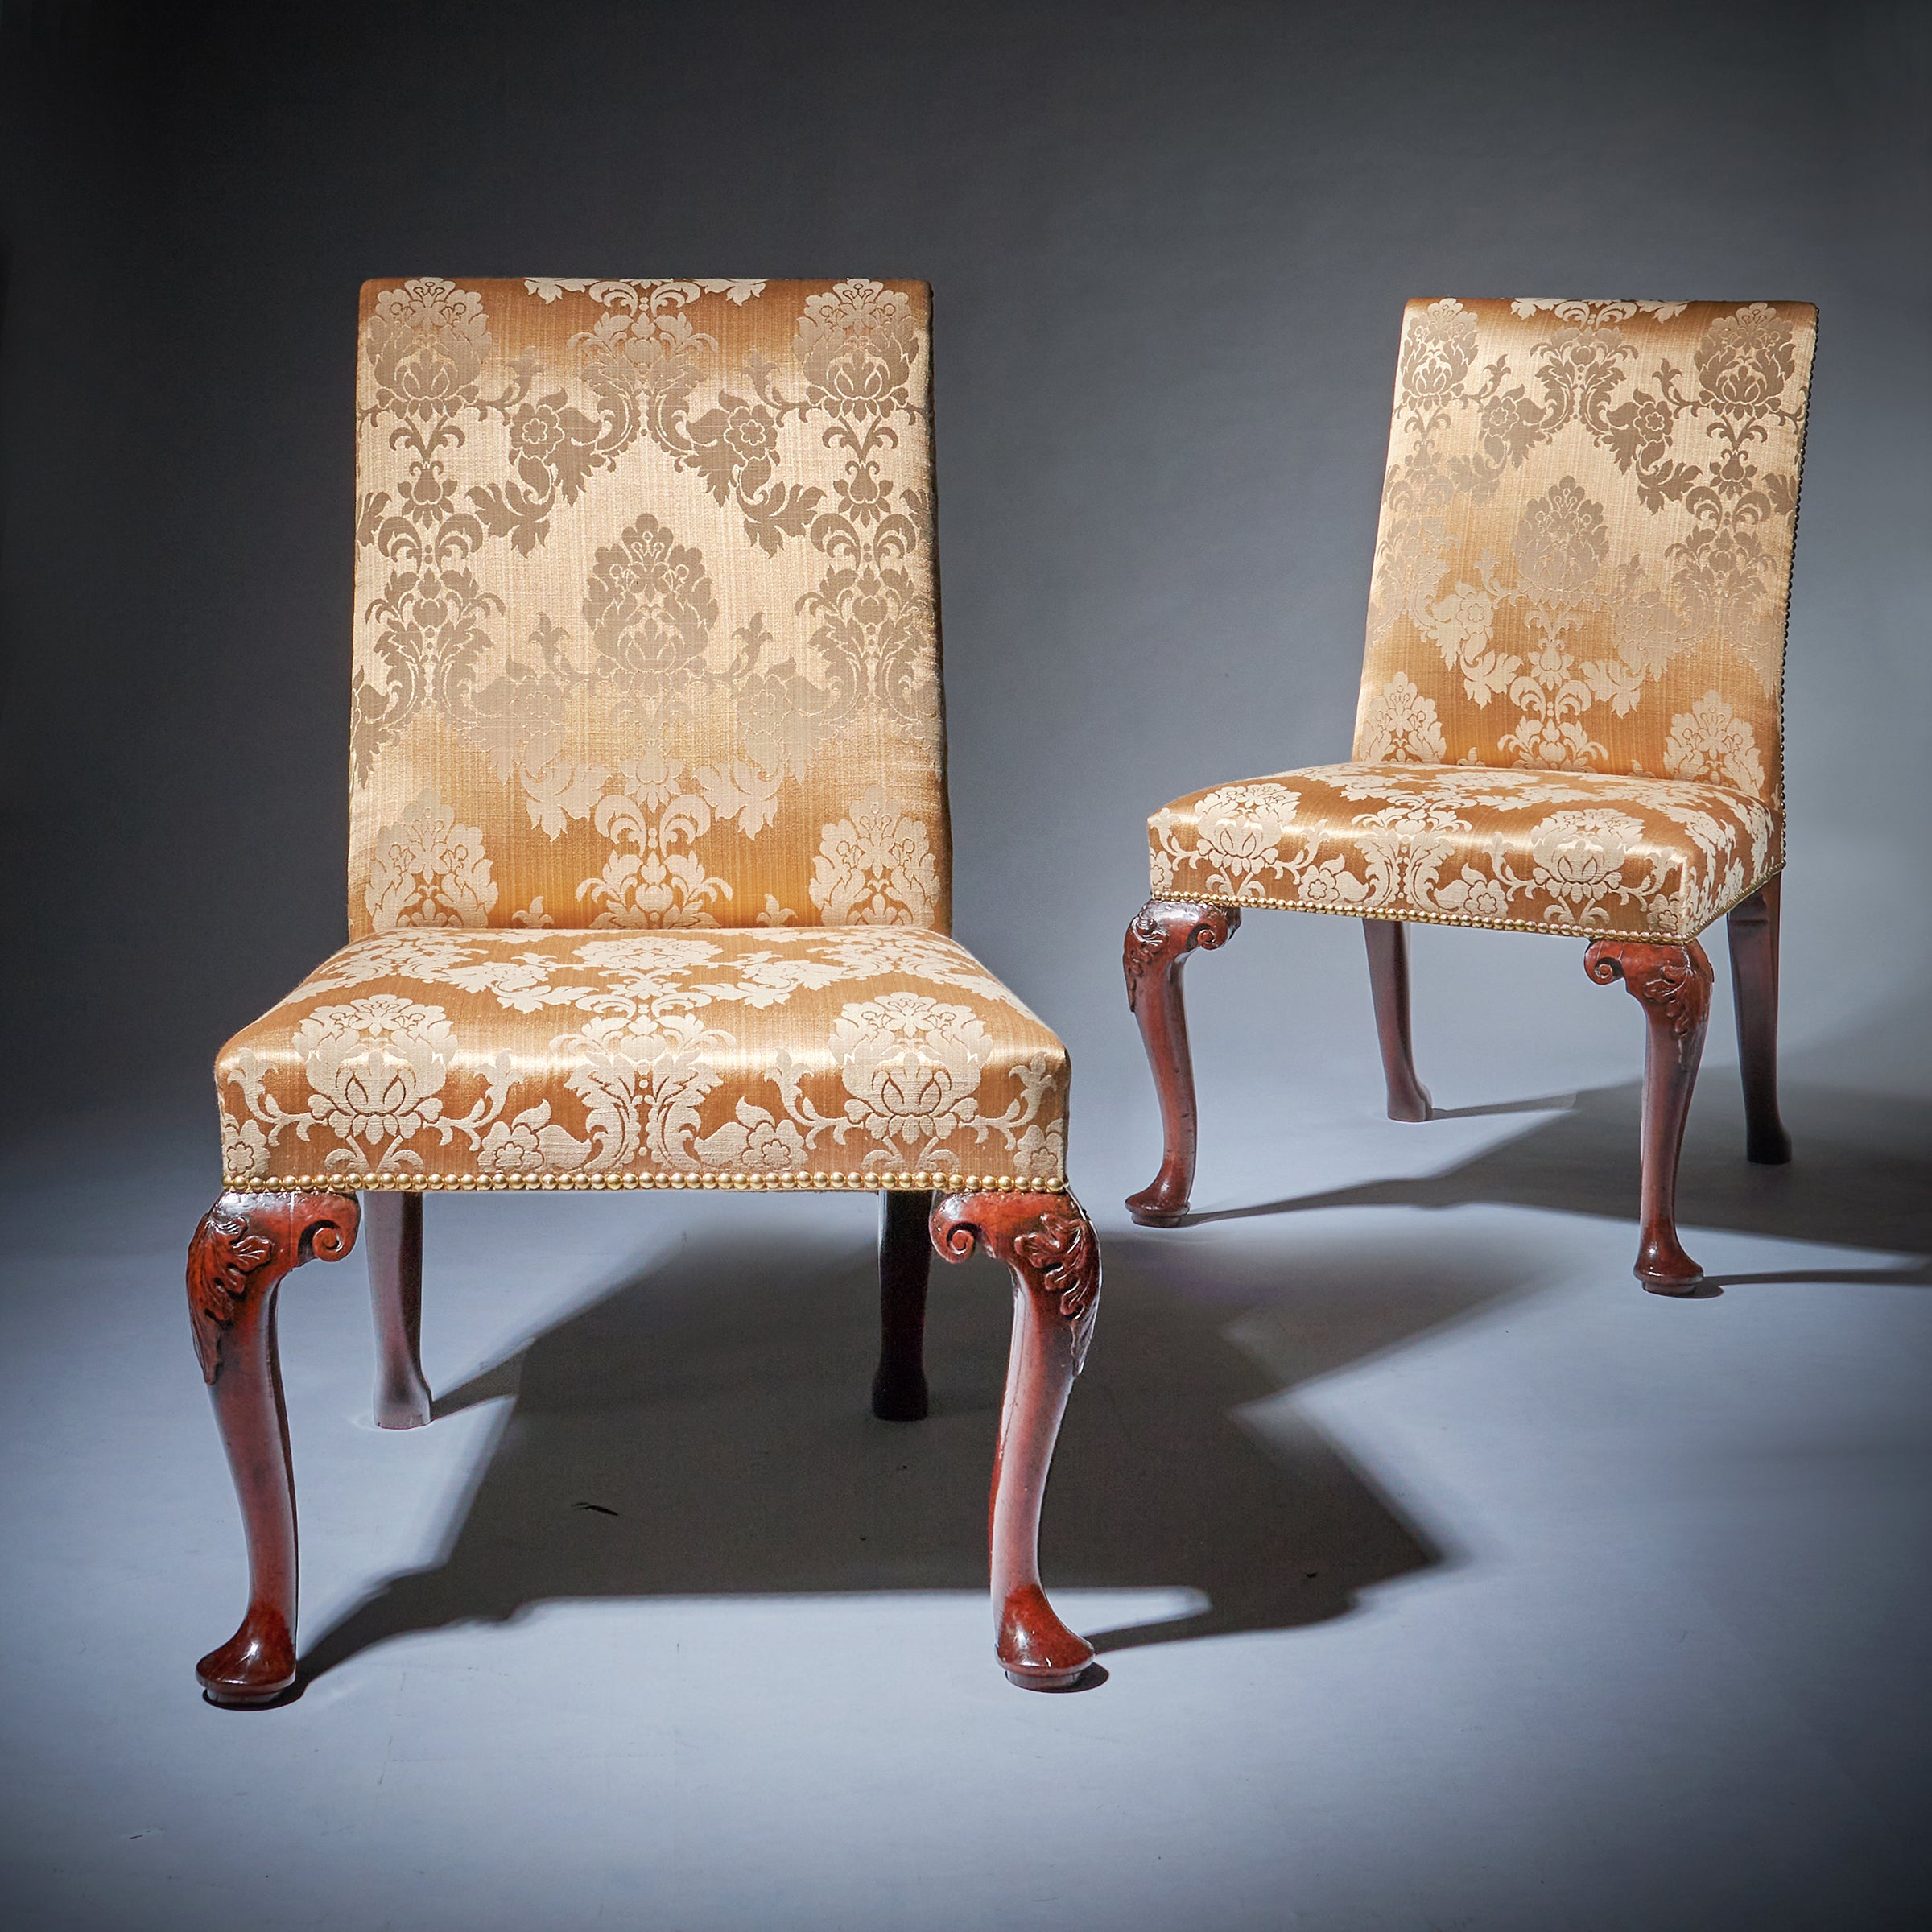 A Pair of 18th Century George II Mahogany High Back Chairs on Carved Cabriole Legs 1